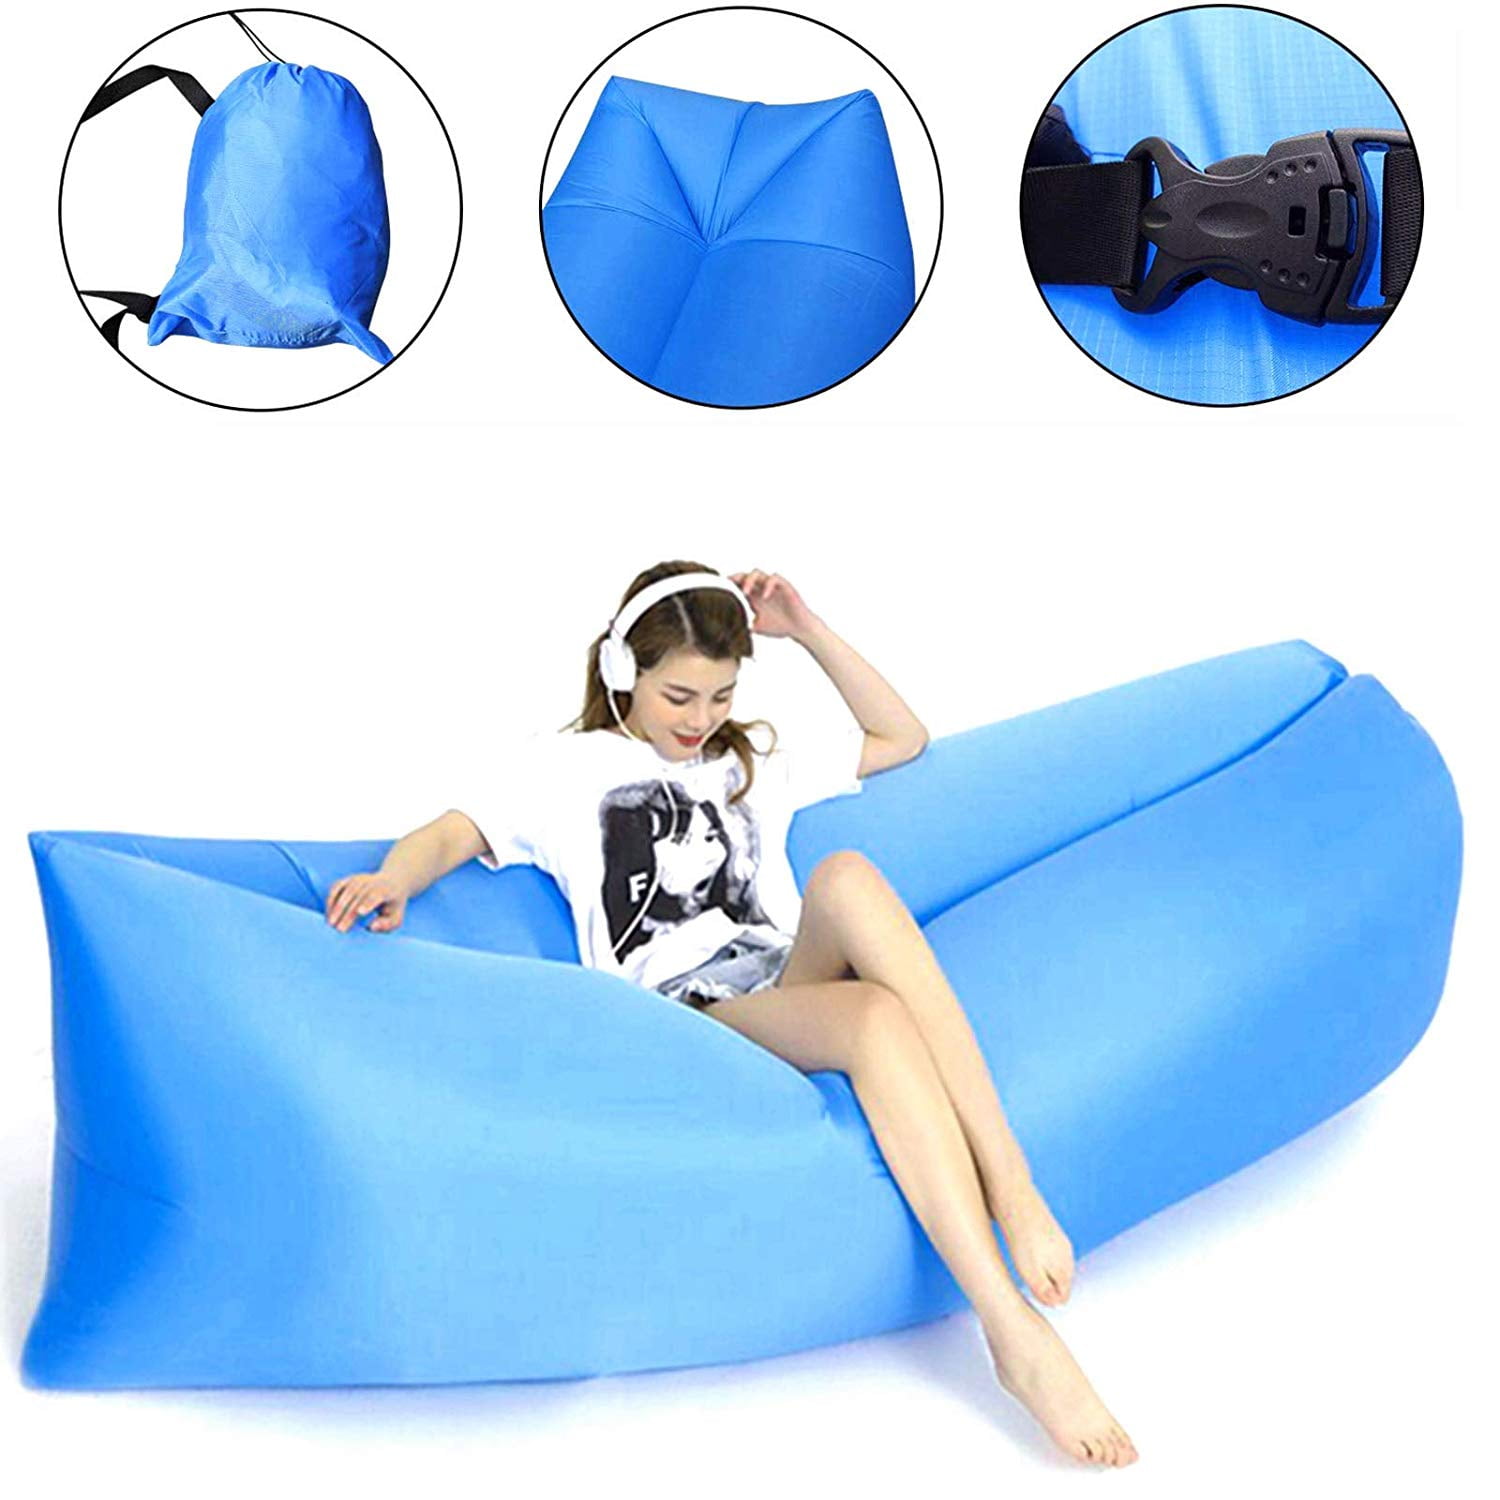 Inflatable Sofa Air Bed Outdoor Lounger Sofa Lazy Sack Hangout Camping Beach 